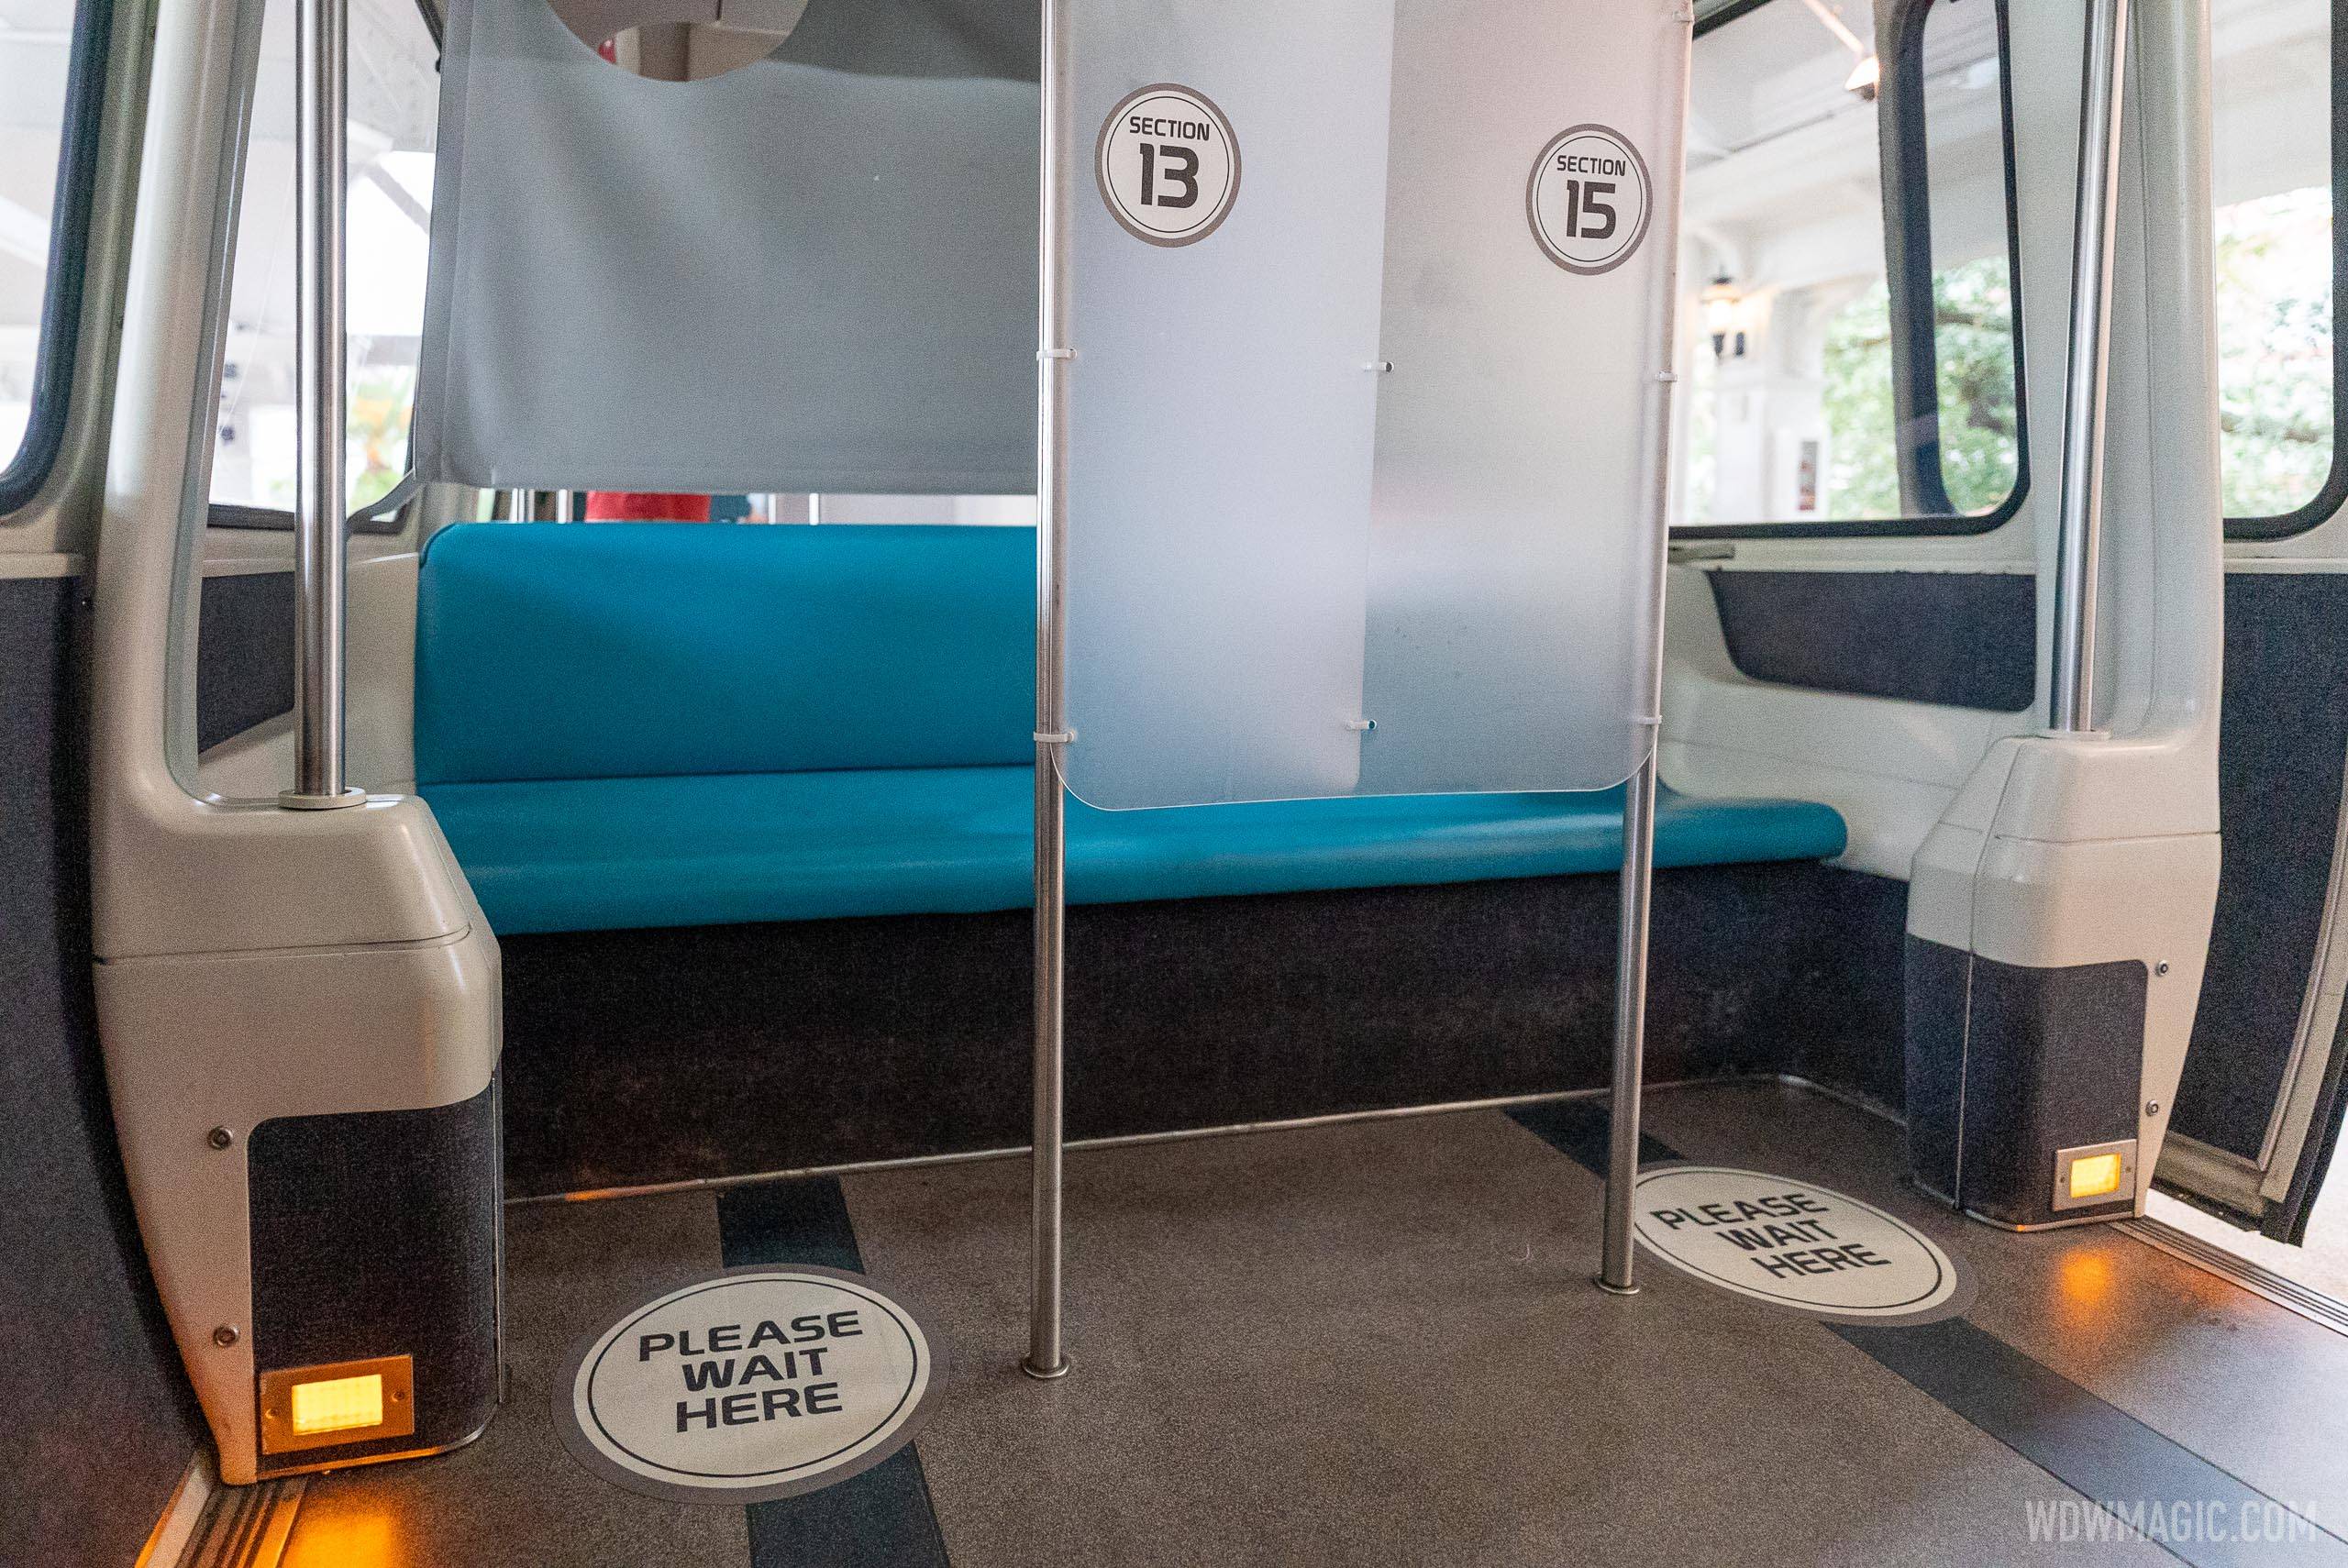 Standing spots installed inside the monorail cabins